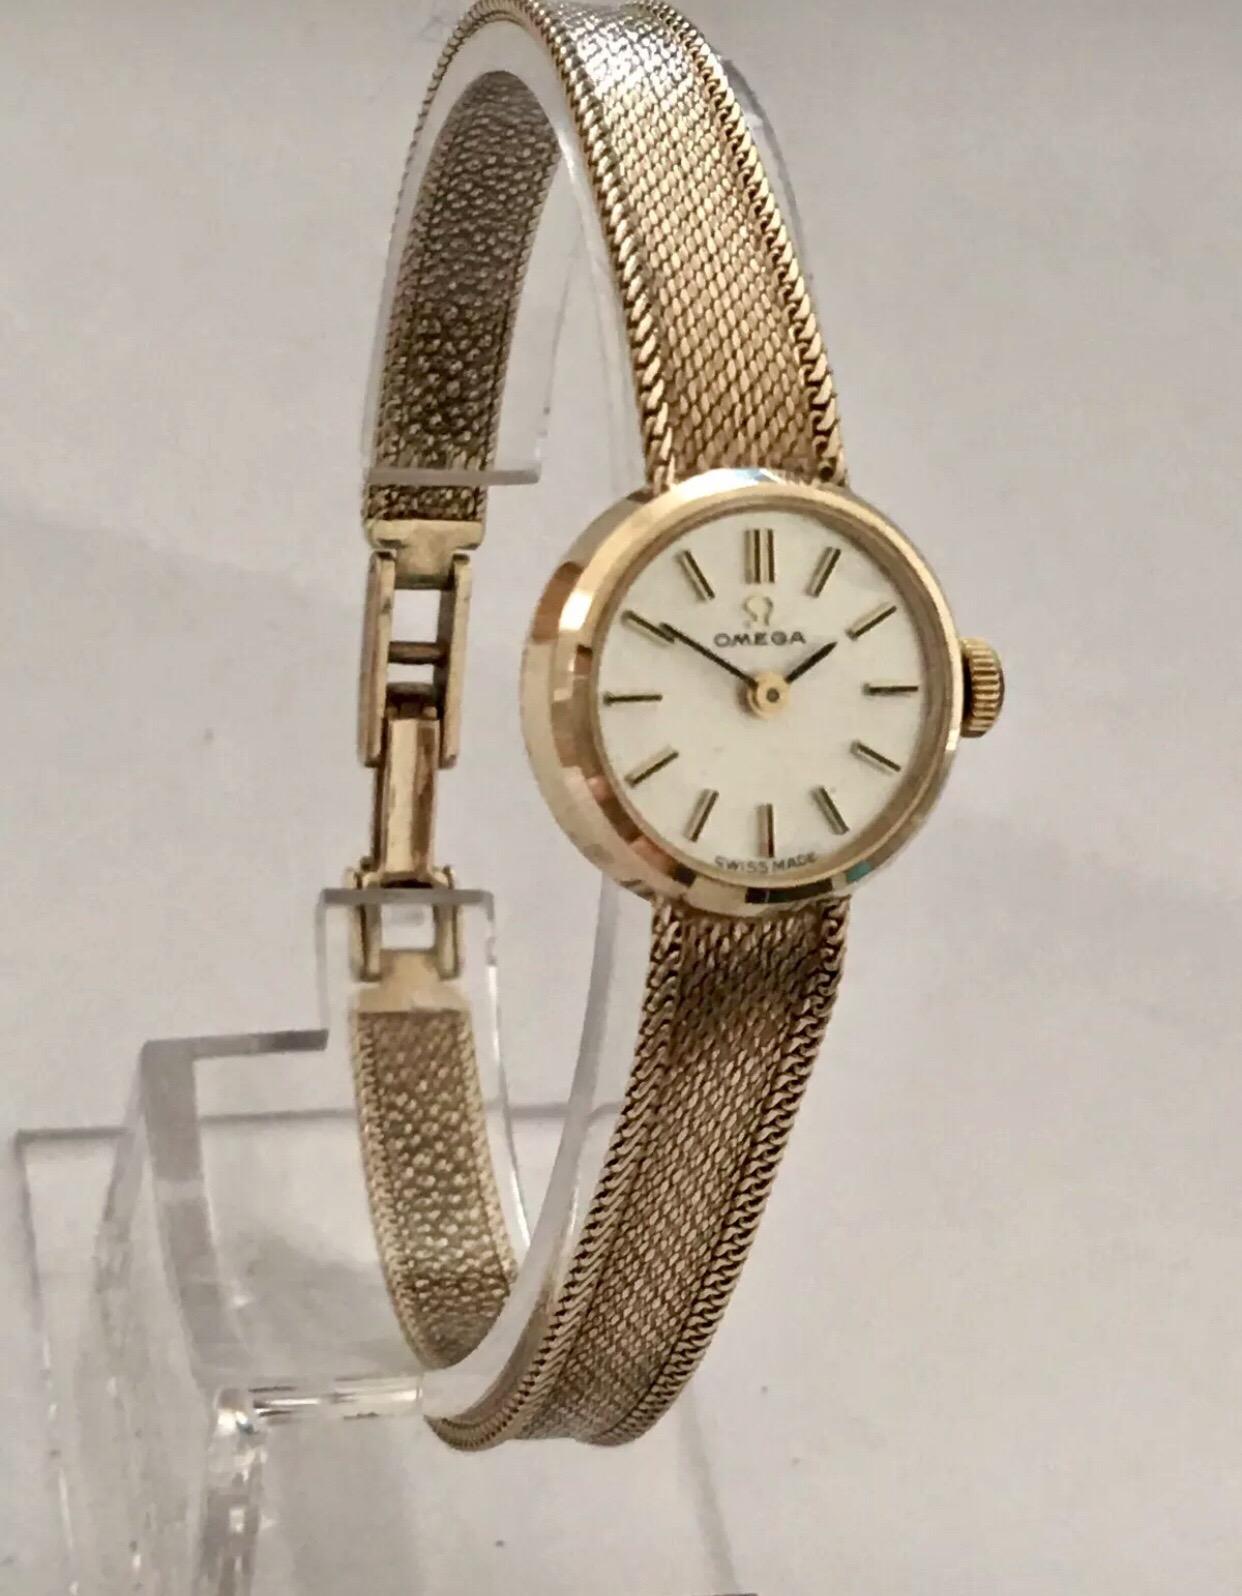 9K Gold Vintage Hand-winding Omega Ladies Wristwatch.
This beautiful watch is working and ticking well.